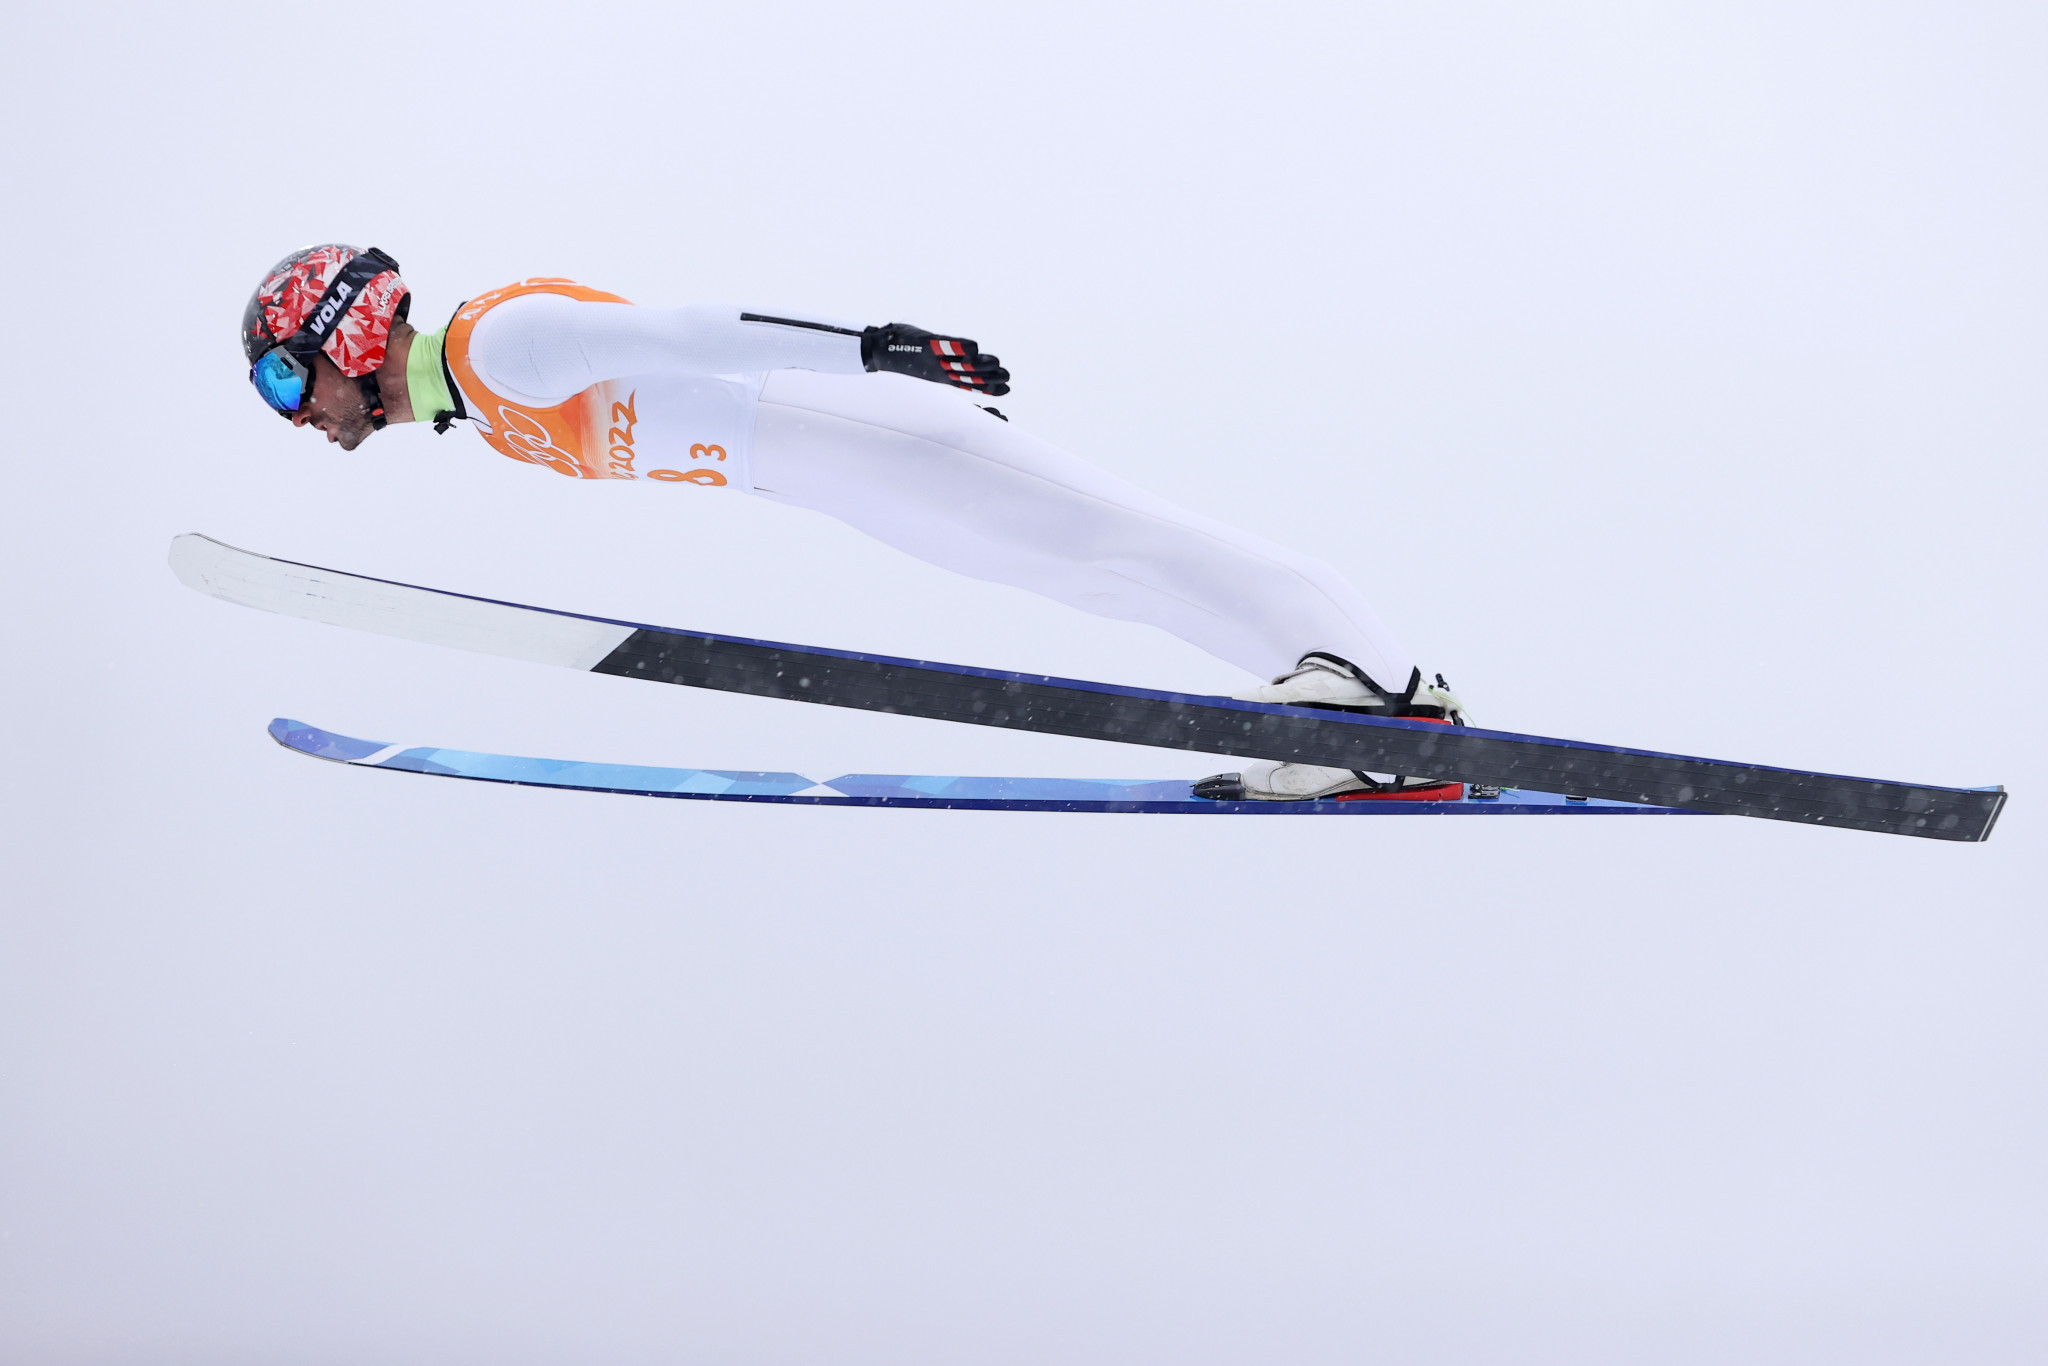 Lukas Greiderer won a Nordic combined bronze for Austria in the men's individual normal hill-10km event at the Beijing 2022 Winter Olympics ©Getty Images